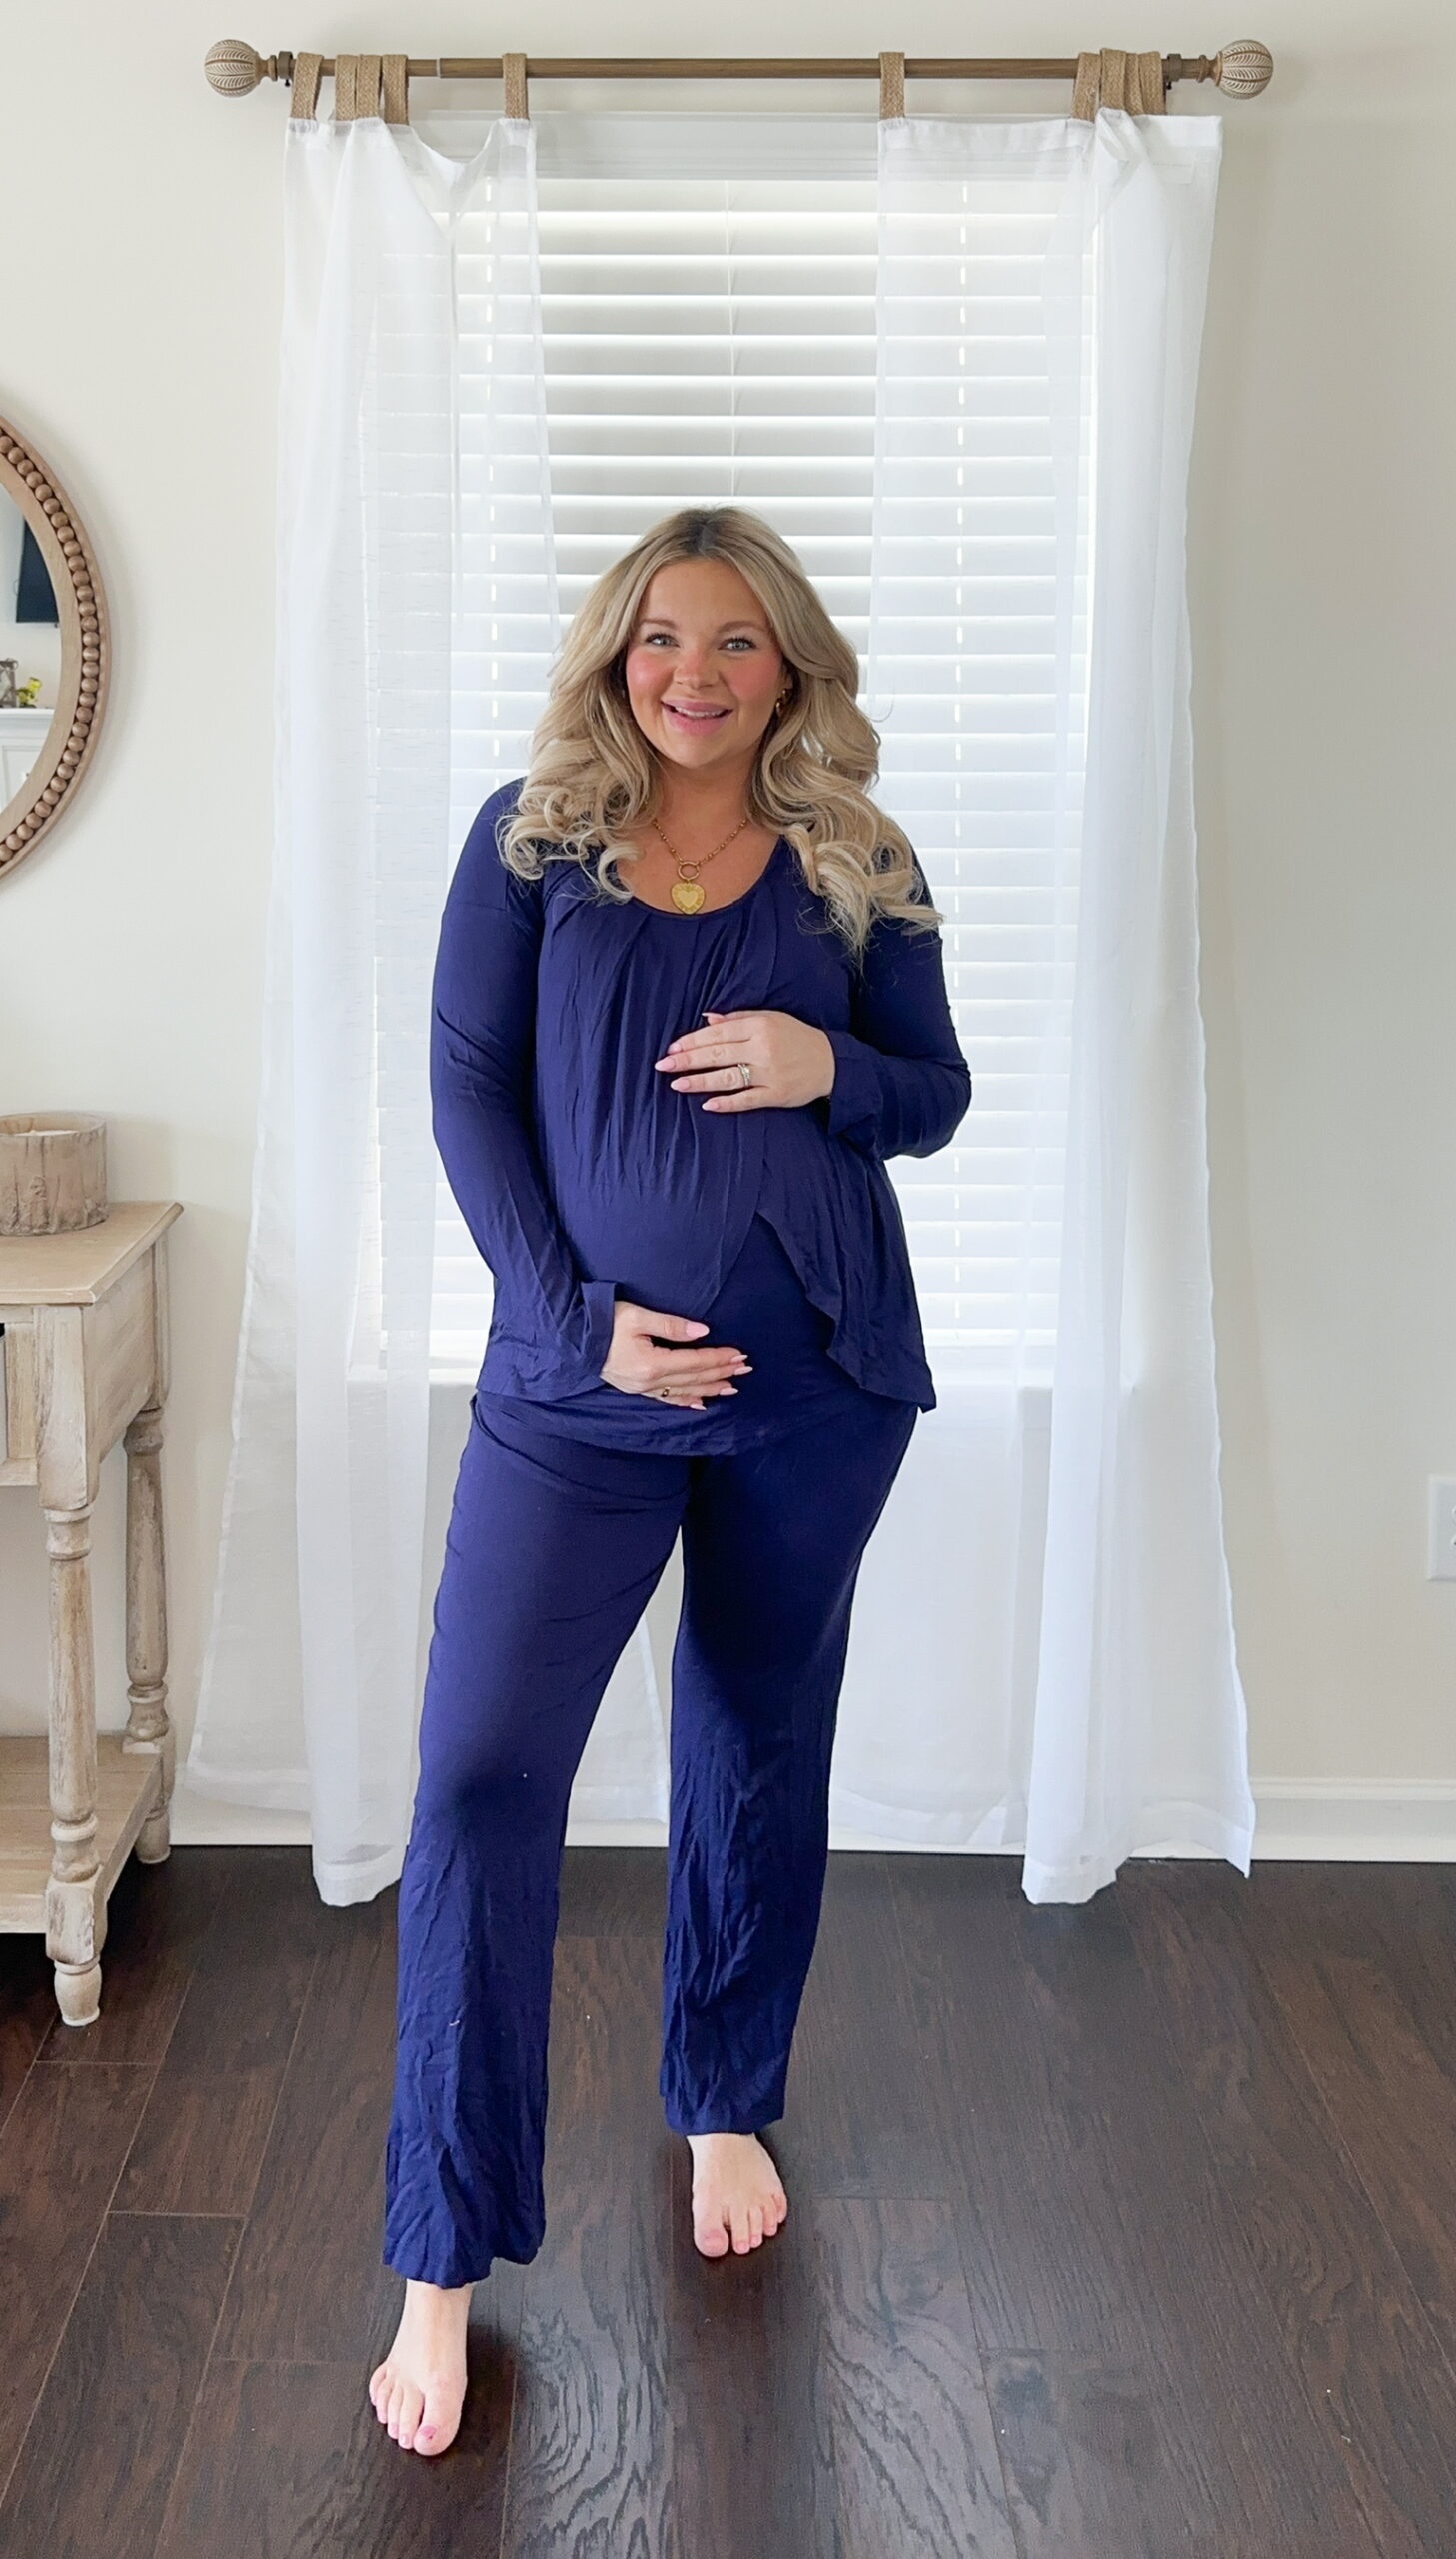 maternity outfits